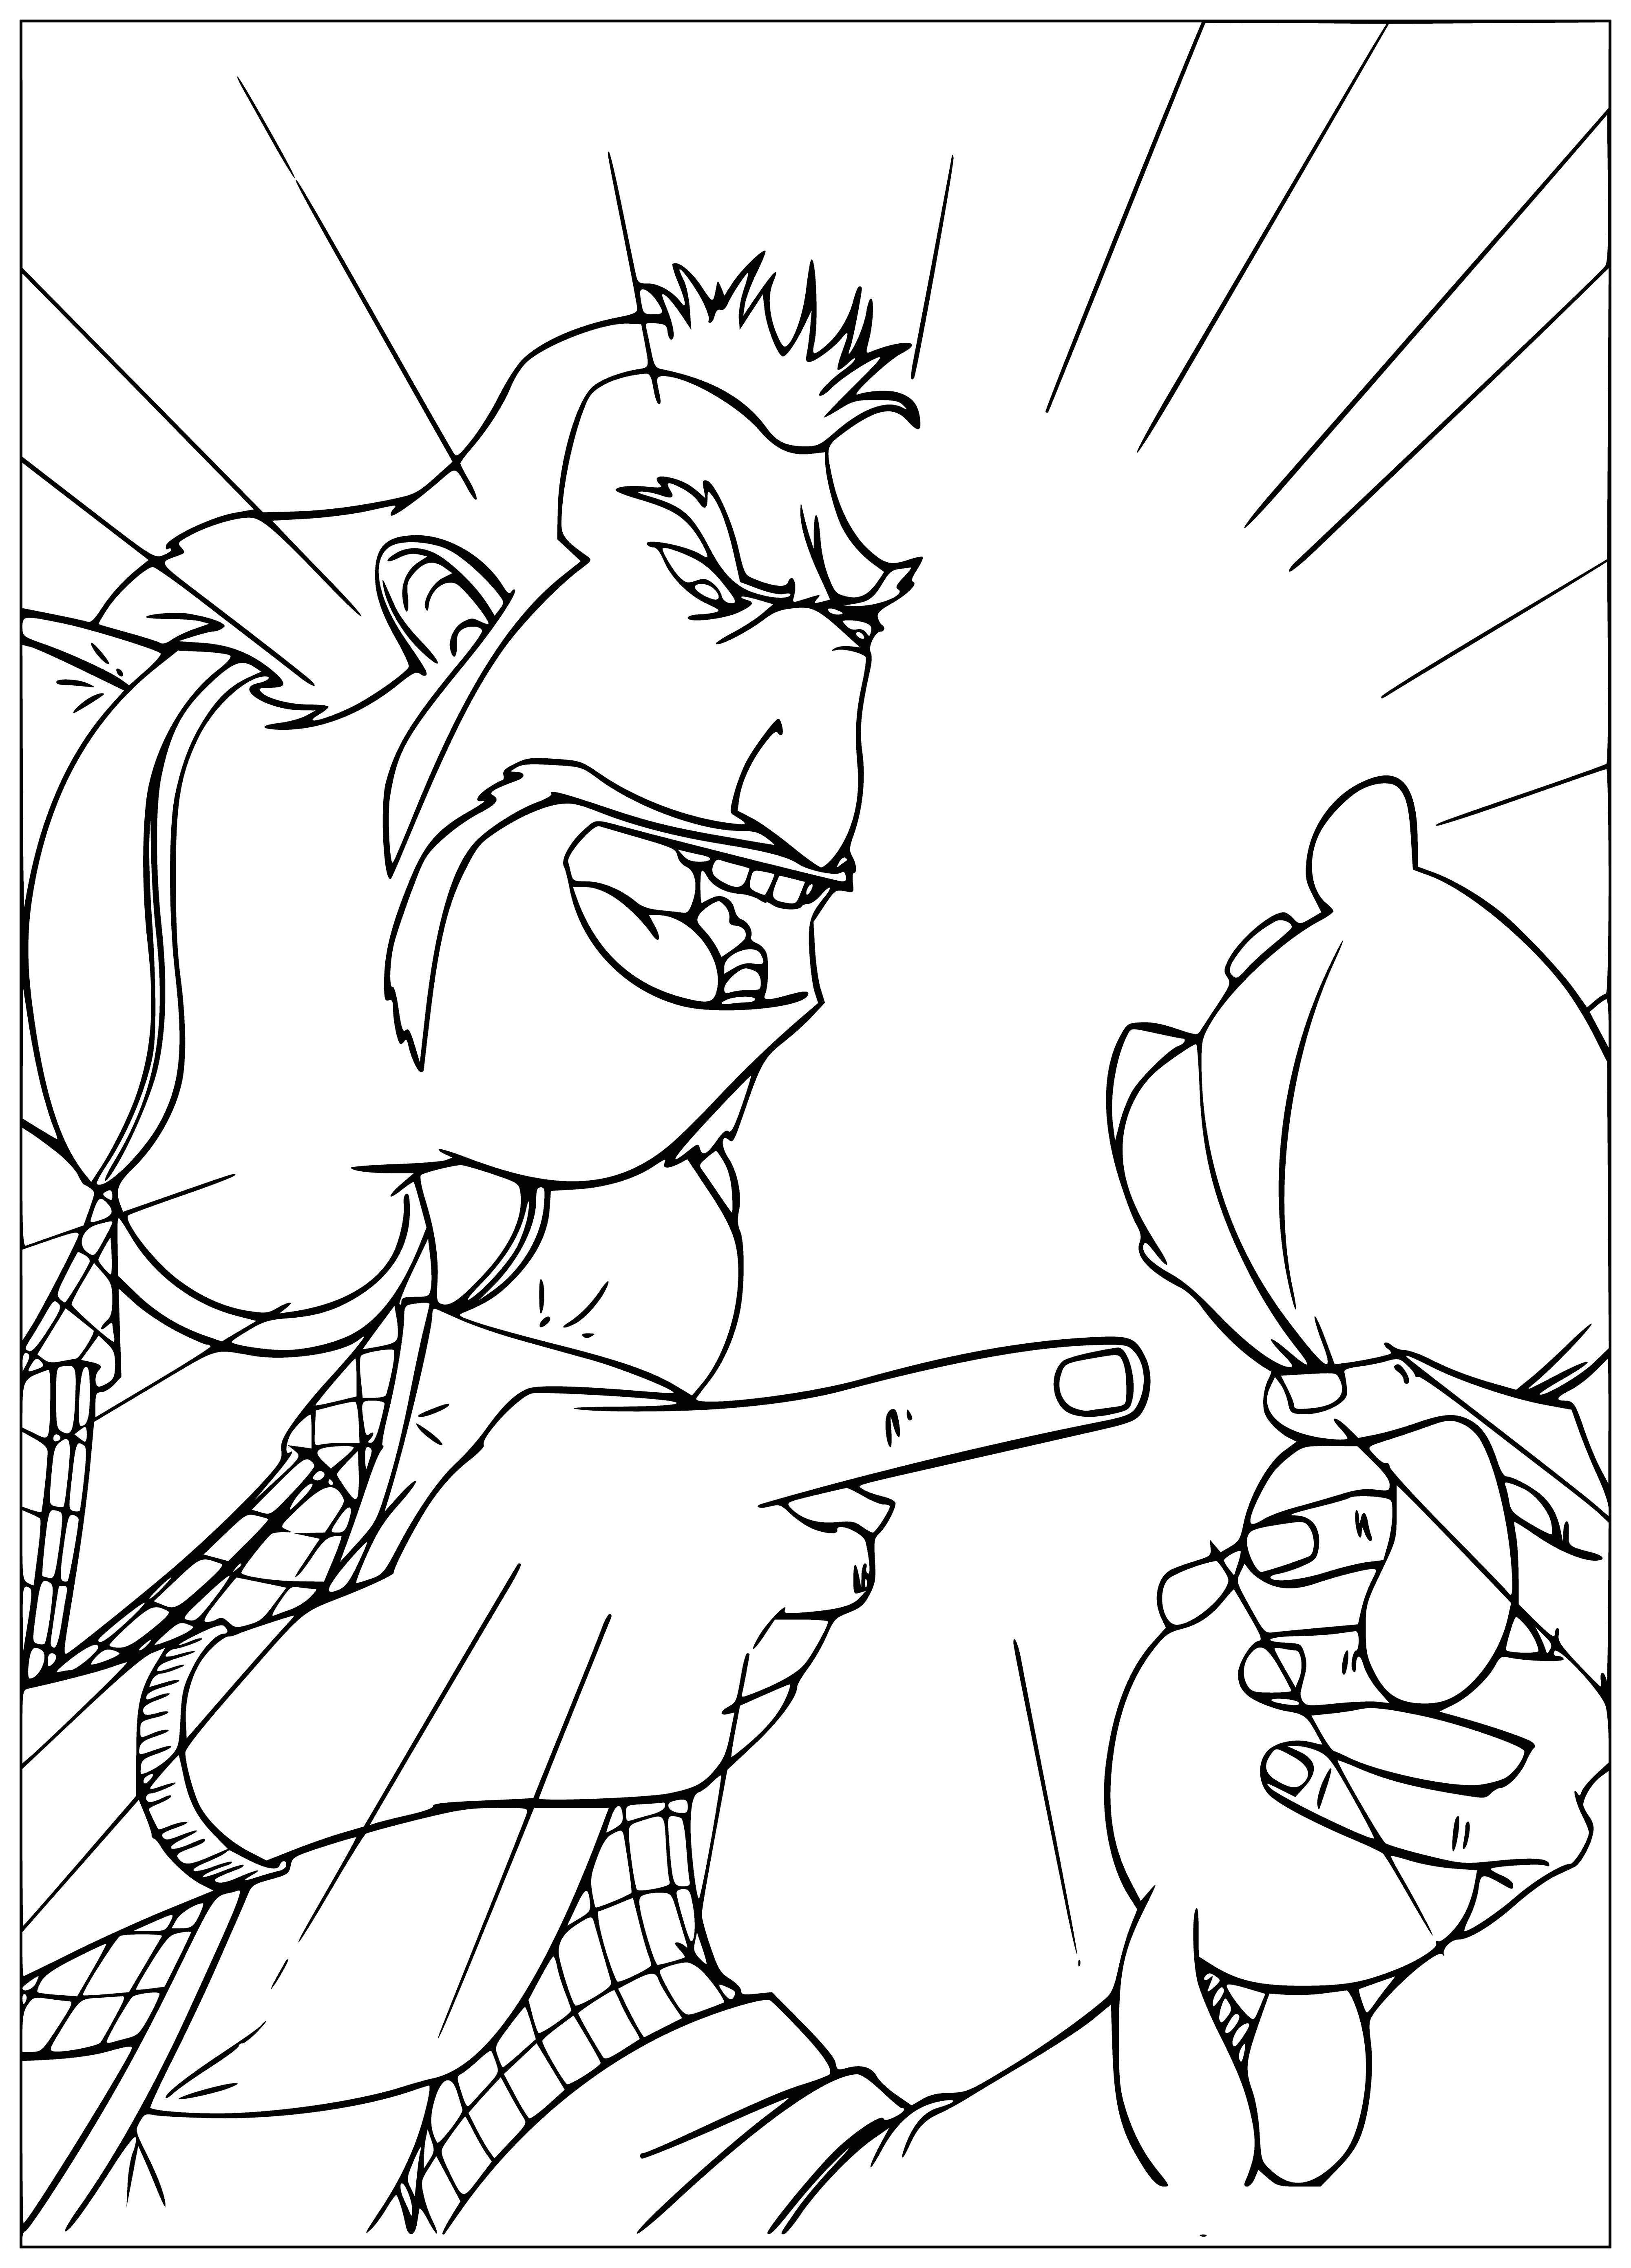 coloring page: Native American chief and warriors on horseback chase bison on a coloring page, armed with bows and arrows.